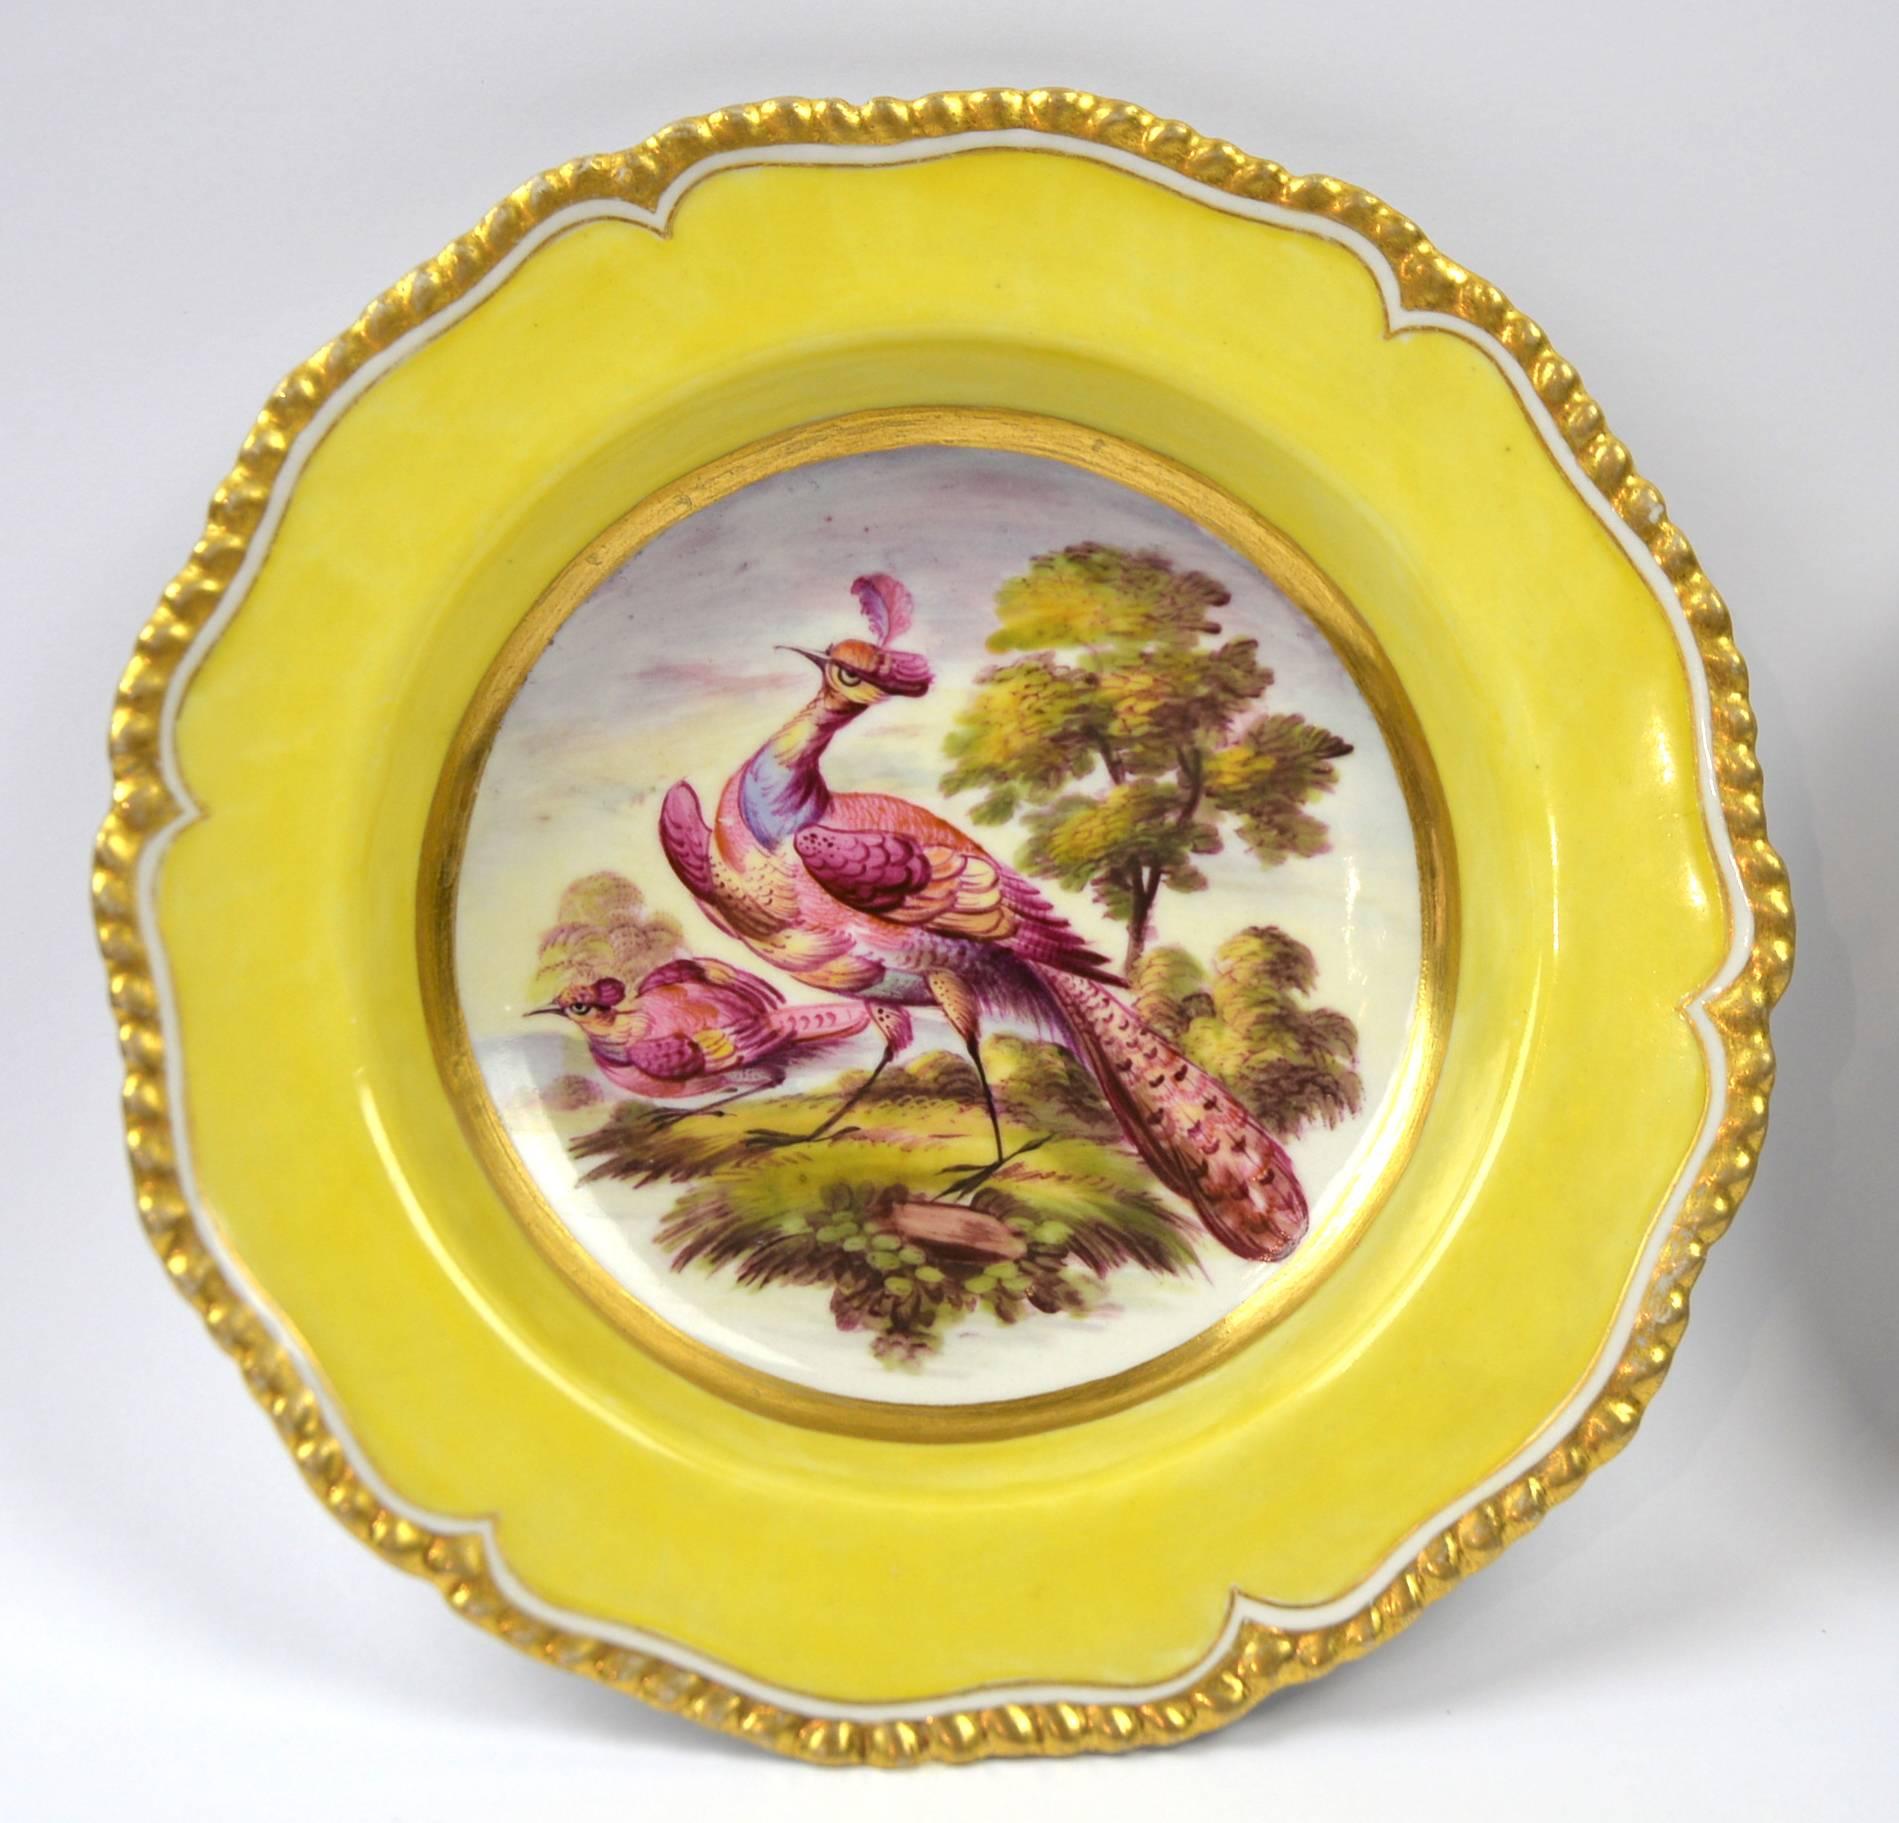 A fine and rare pair of flight barr and barr worcester side or berry plates, having a highly desirable yellow ground, hand-painted to the centre with exotic birds with gilded gadrooned rims, impressed 'FBB' surmounted by a crown to verso.